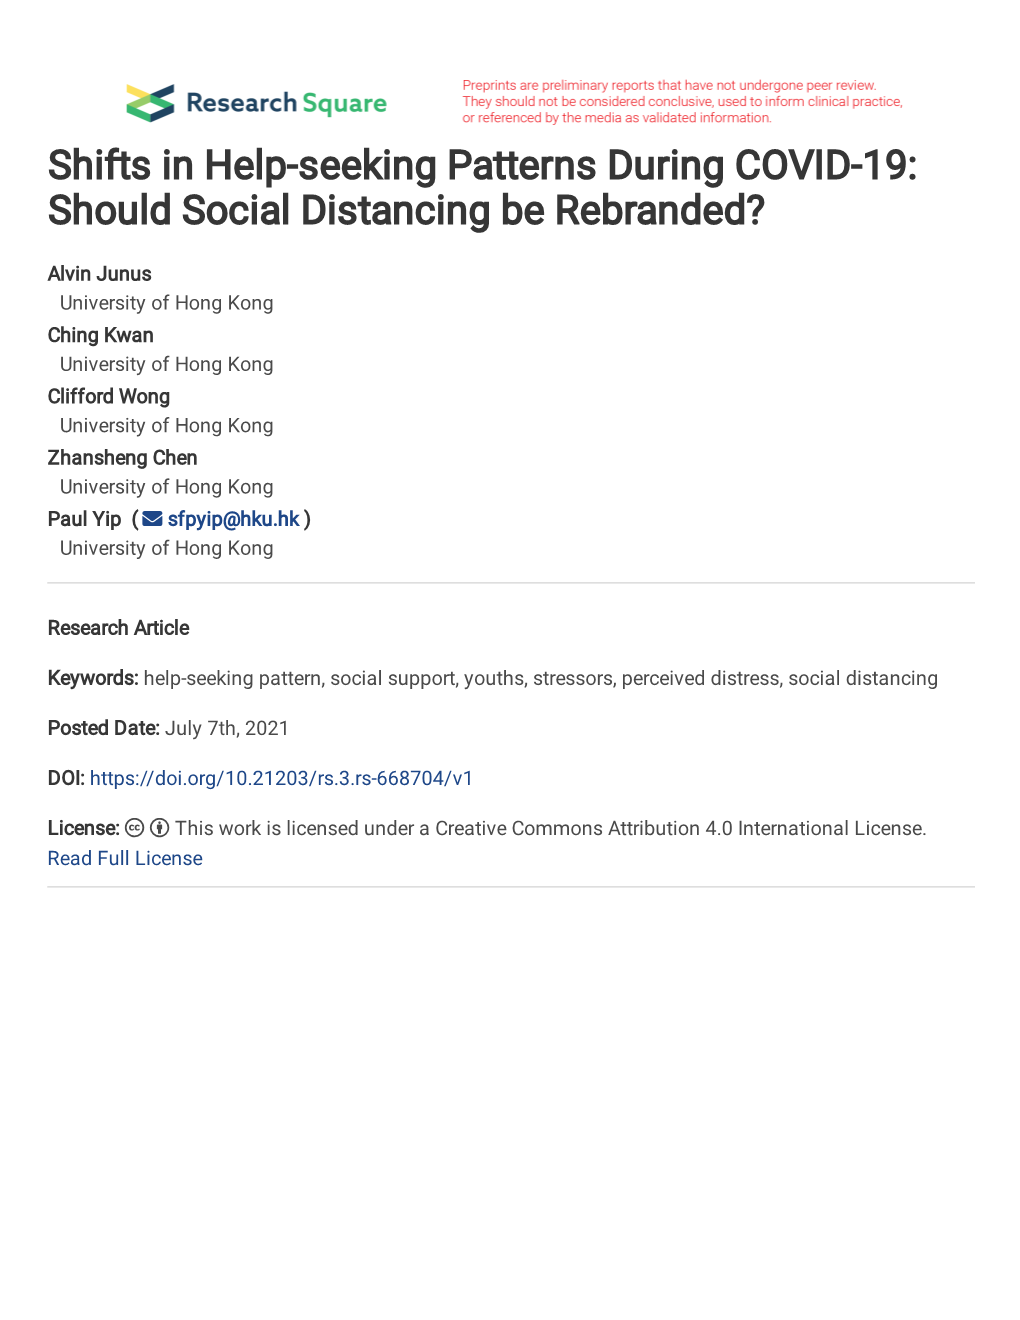 Shifts in Help-Seeking Patterns During COVID-19: Should Social Distancing Be Rebranded?